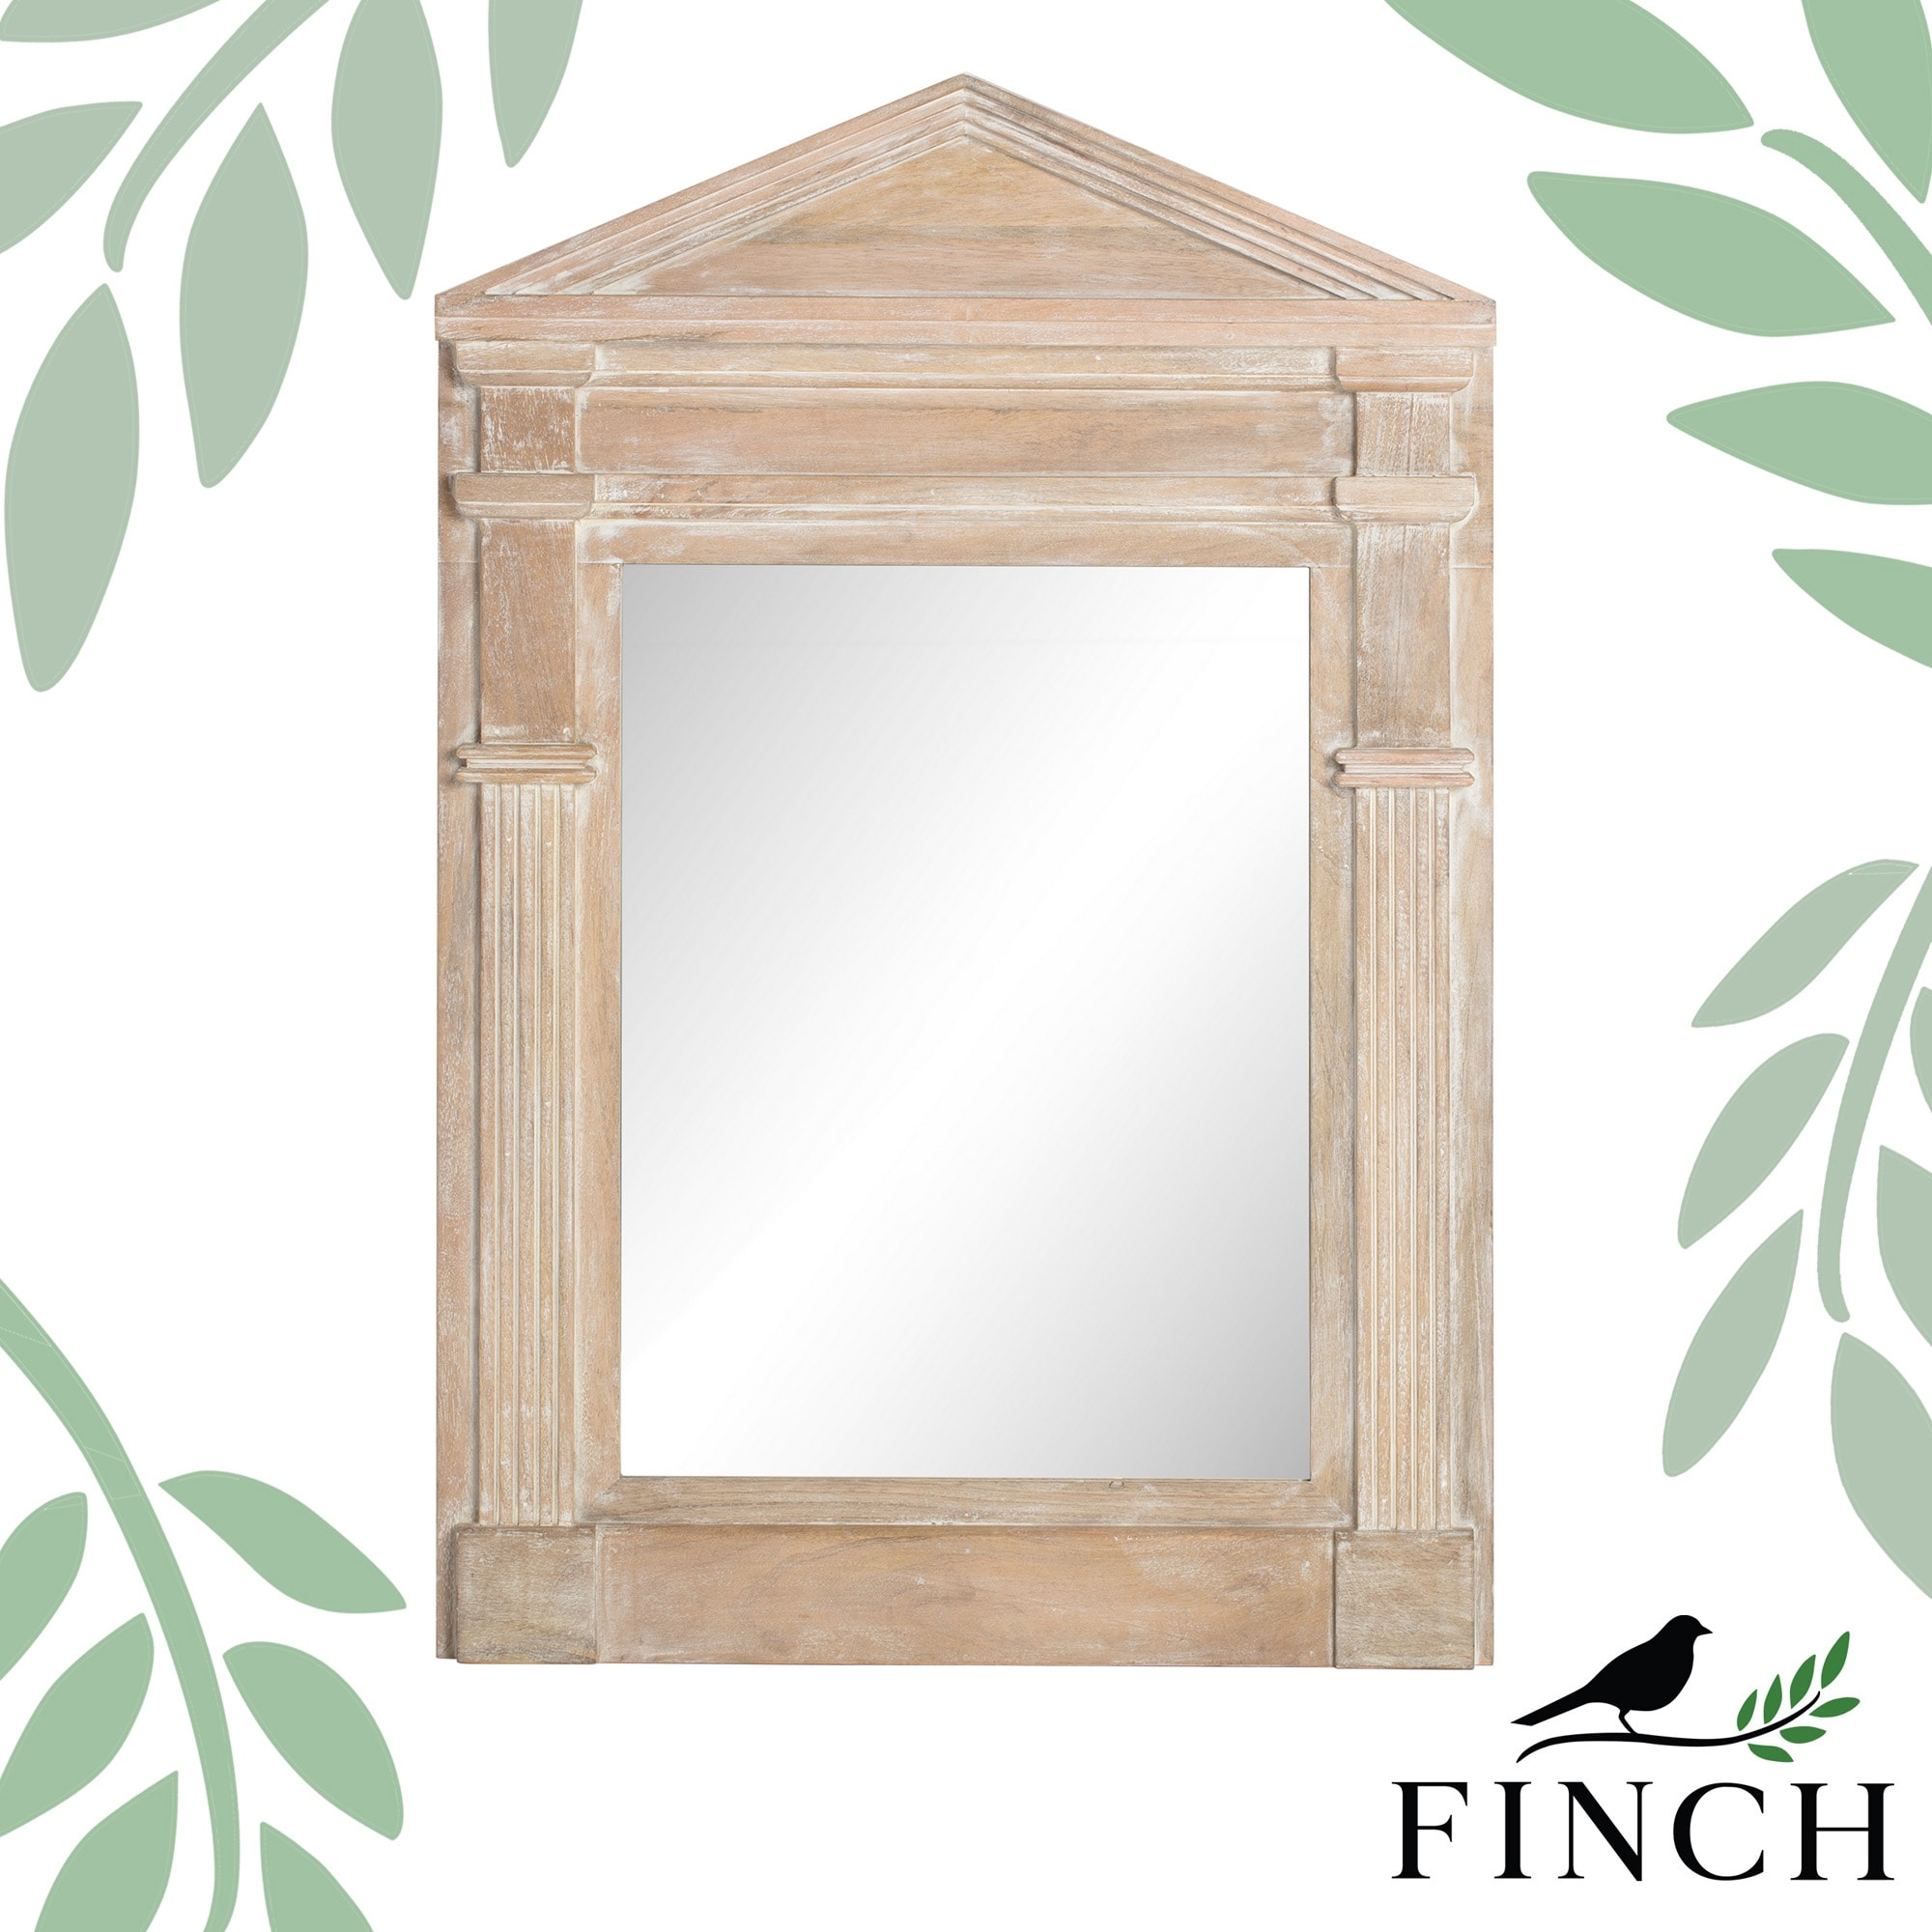 Finch Westport Distressed Wood Hanging Wall Mirror White Wash Overstock 32442062